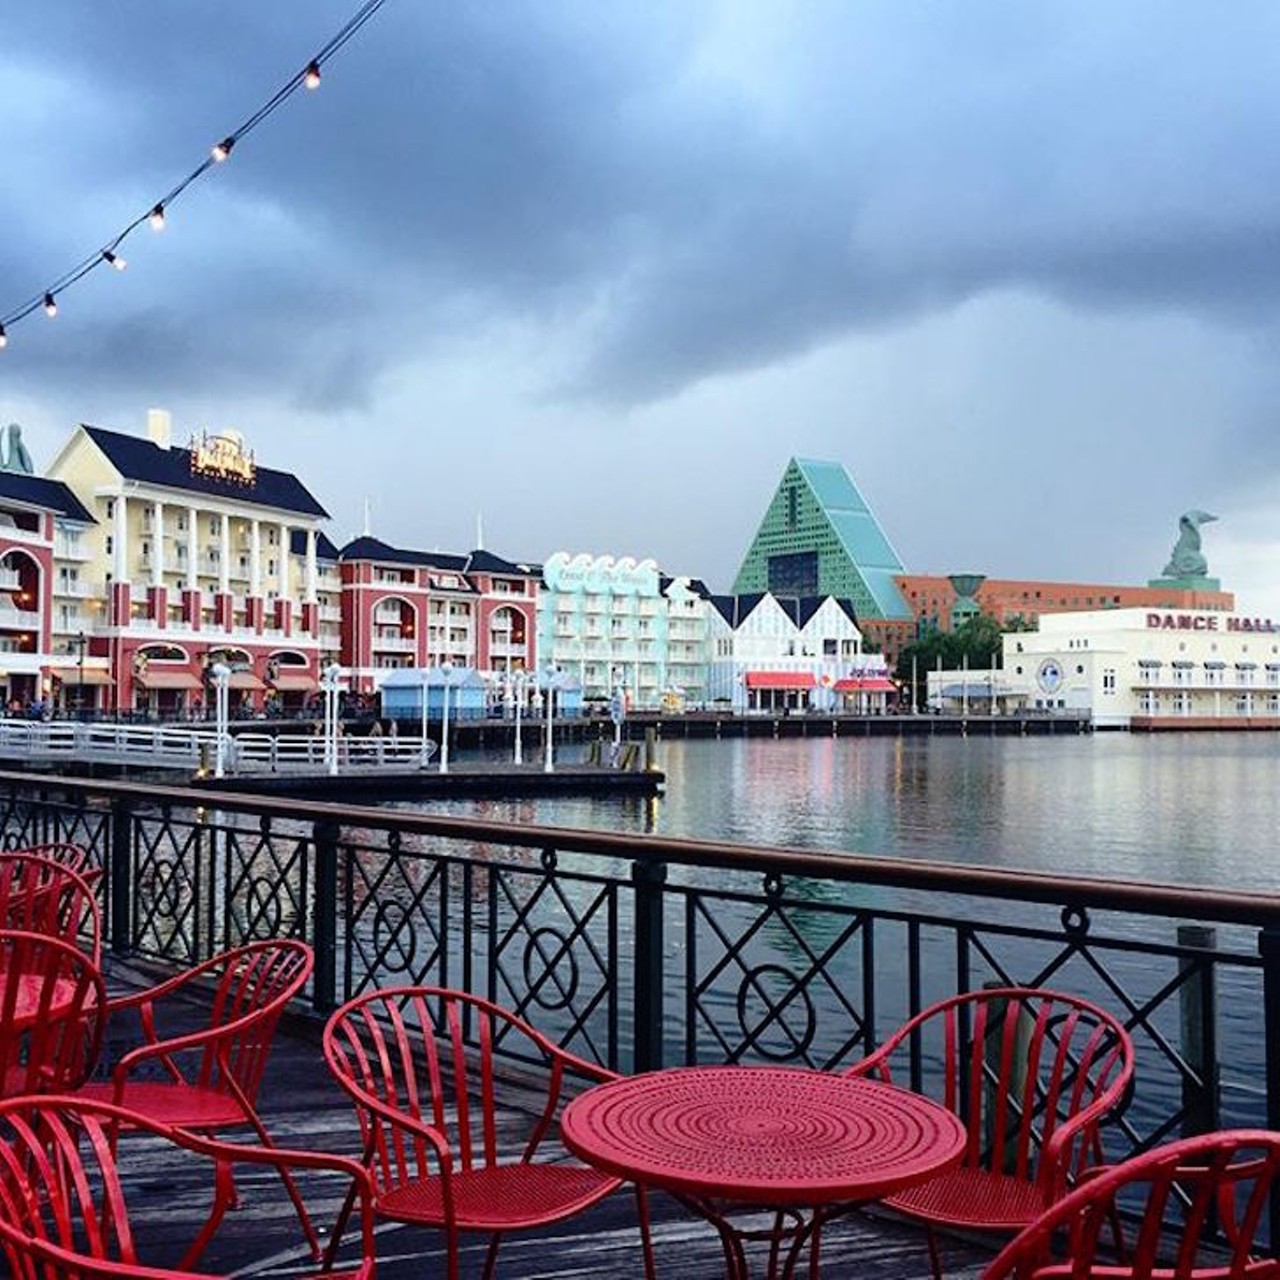 Enjoy an evening at the Boardwalk Resort
Disney Springs gets all the attention these days but the Boardwalk has some great options too. From the Big River Grille craft brewery (the only such brewery on Walt Disney property) to not one but two nightclub style venues the Boardwalk is a surprisingly happening place that few locals rarely visit.  
Photo via mouseketeering/Instagram